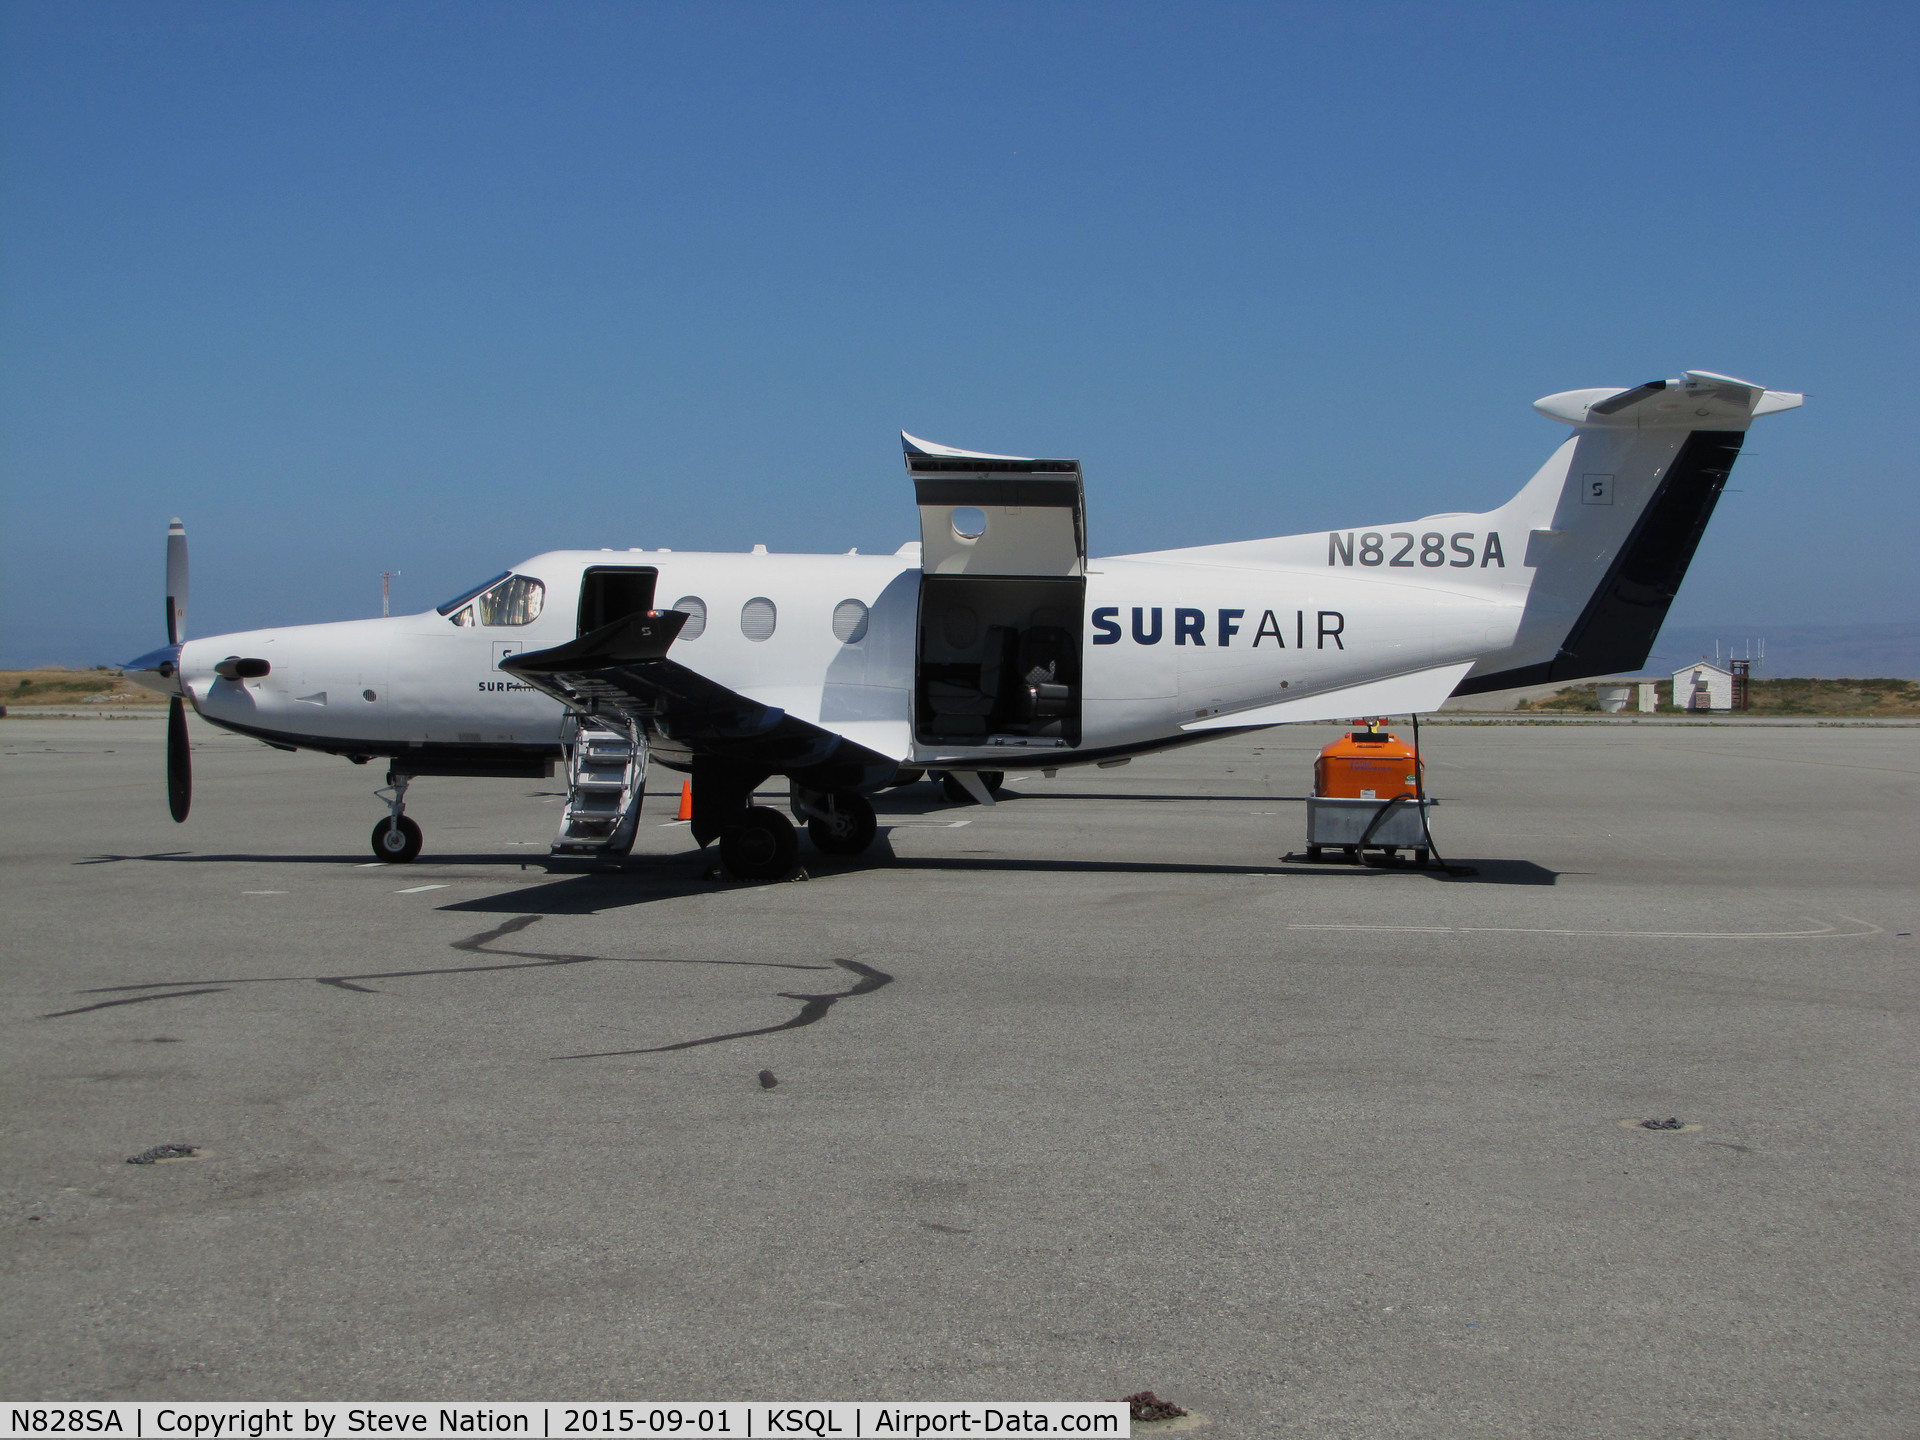 N828SA, 2015 Pilatus PC-12/47E C/N 1525, Surf Airlines 2015 PC-12/47E on ramp @ San Carlos Airport, CA (SF Bay Area terminal) with cargo door open